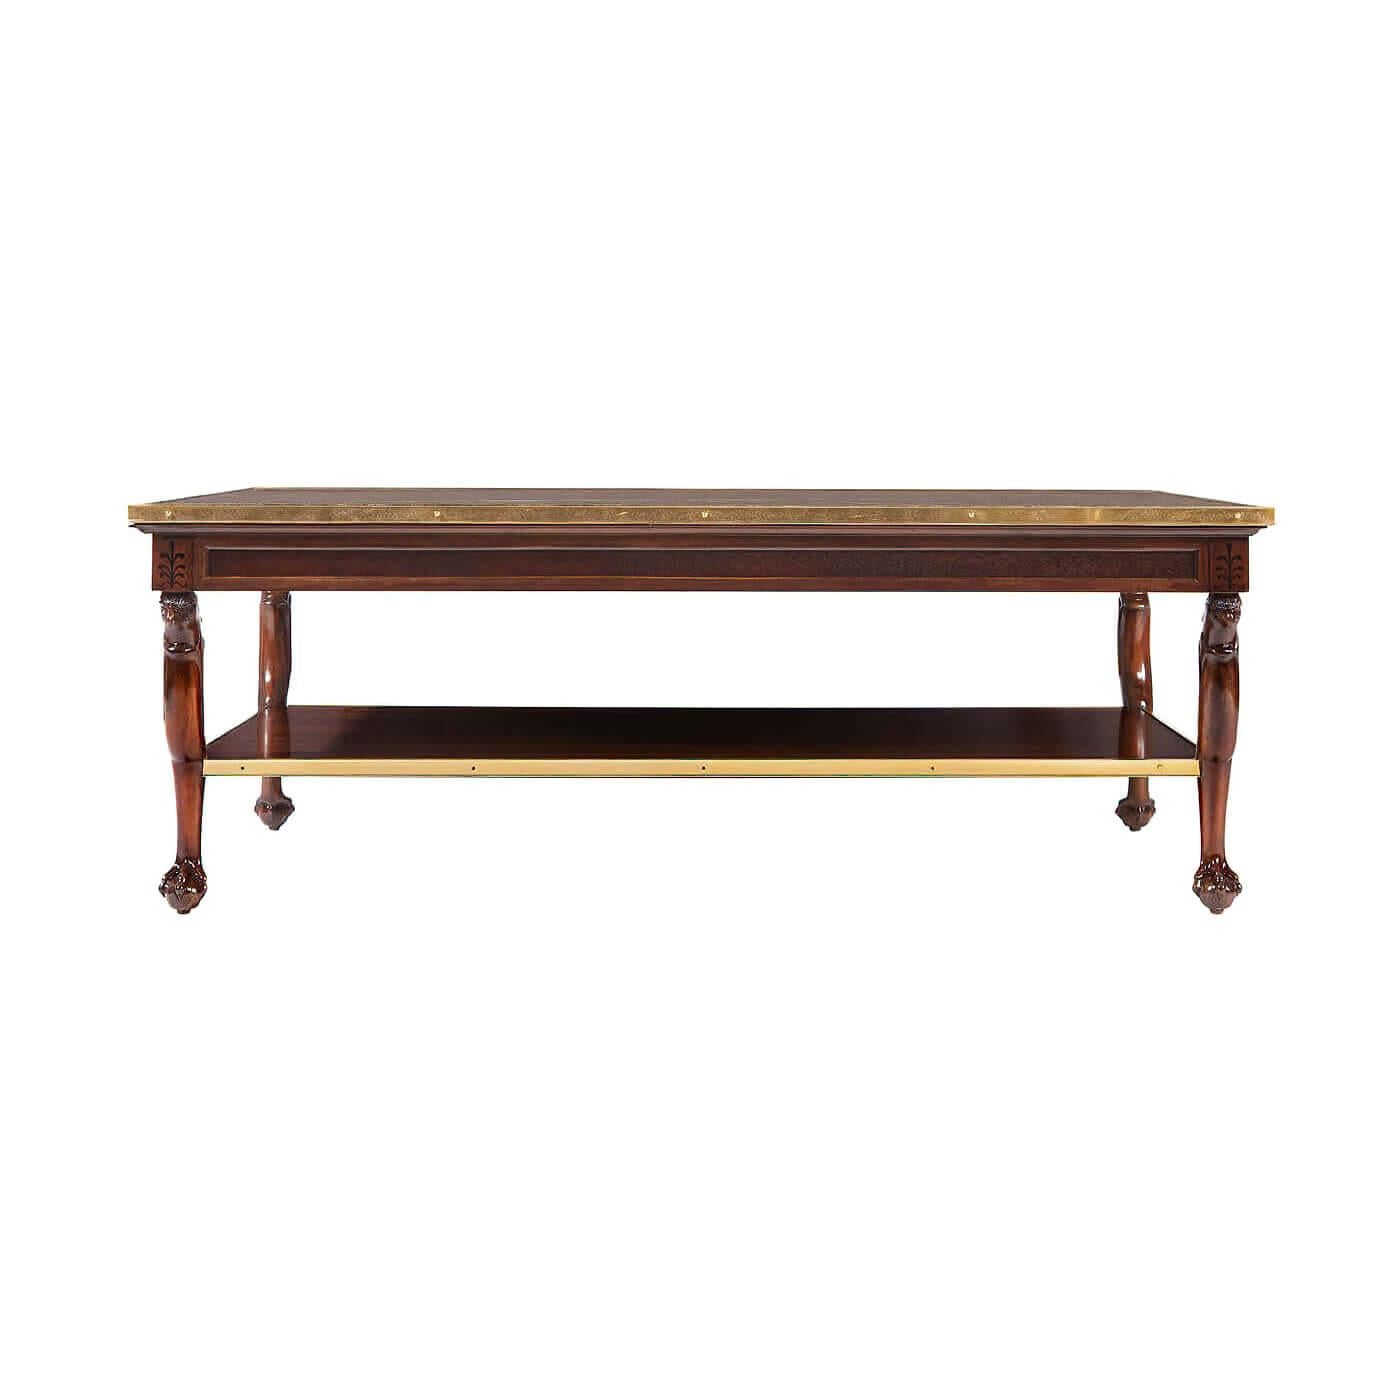 A Neo-Classic style marble top coffee table with inset ebonized paterae decorations. This rectangular table has a marble top and a lower wood shelf with brass galleries, carved griffin head legs, and paw feet. Inspired by an early 19th-century